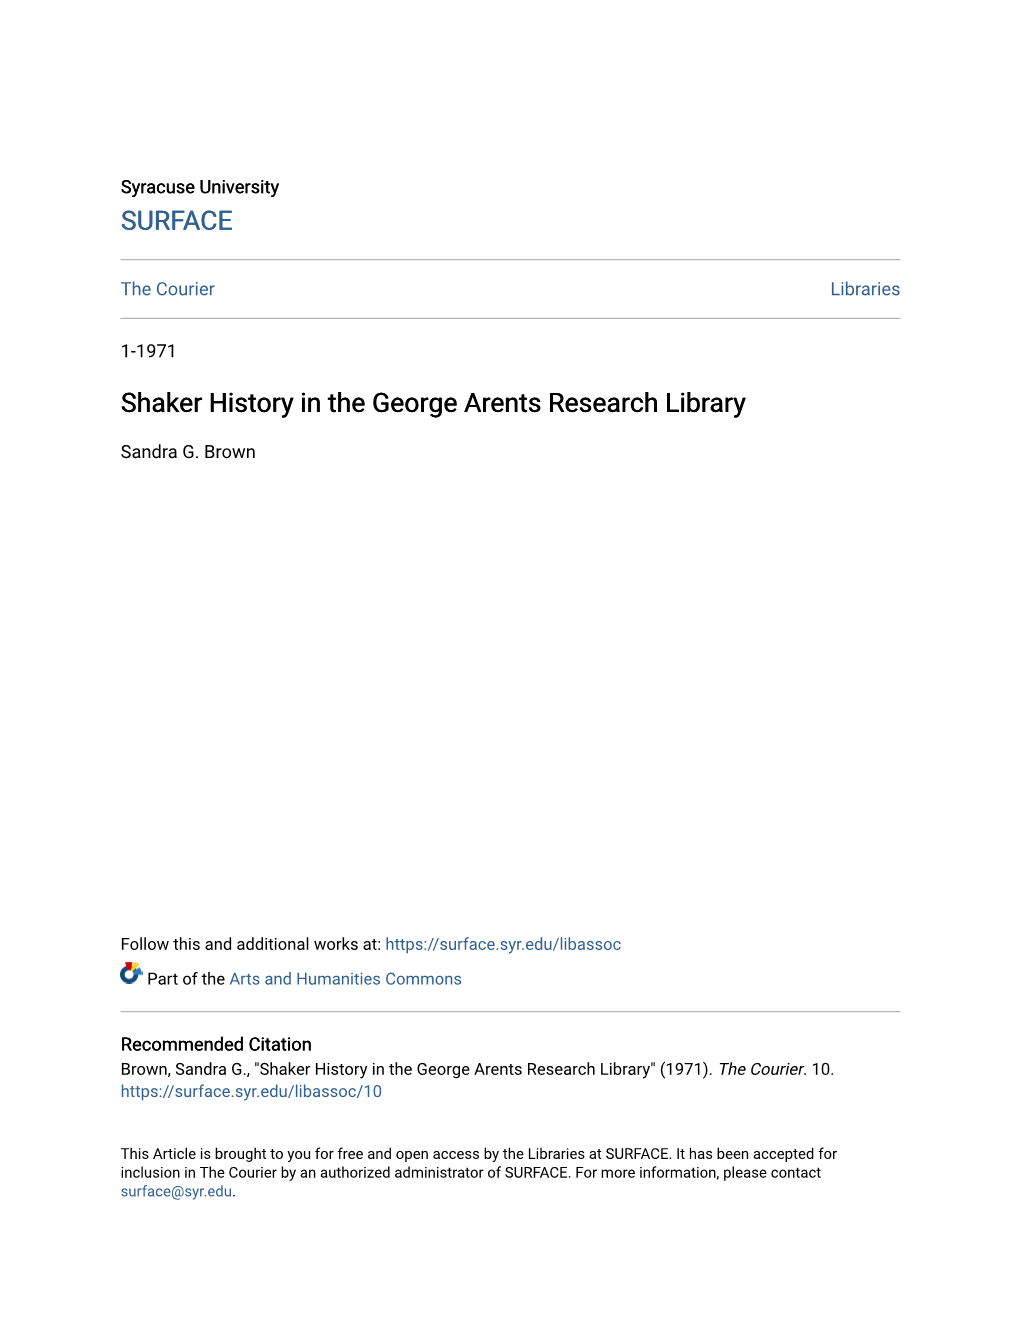 Shaker History in the George Arents Research Library